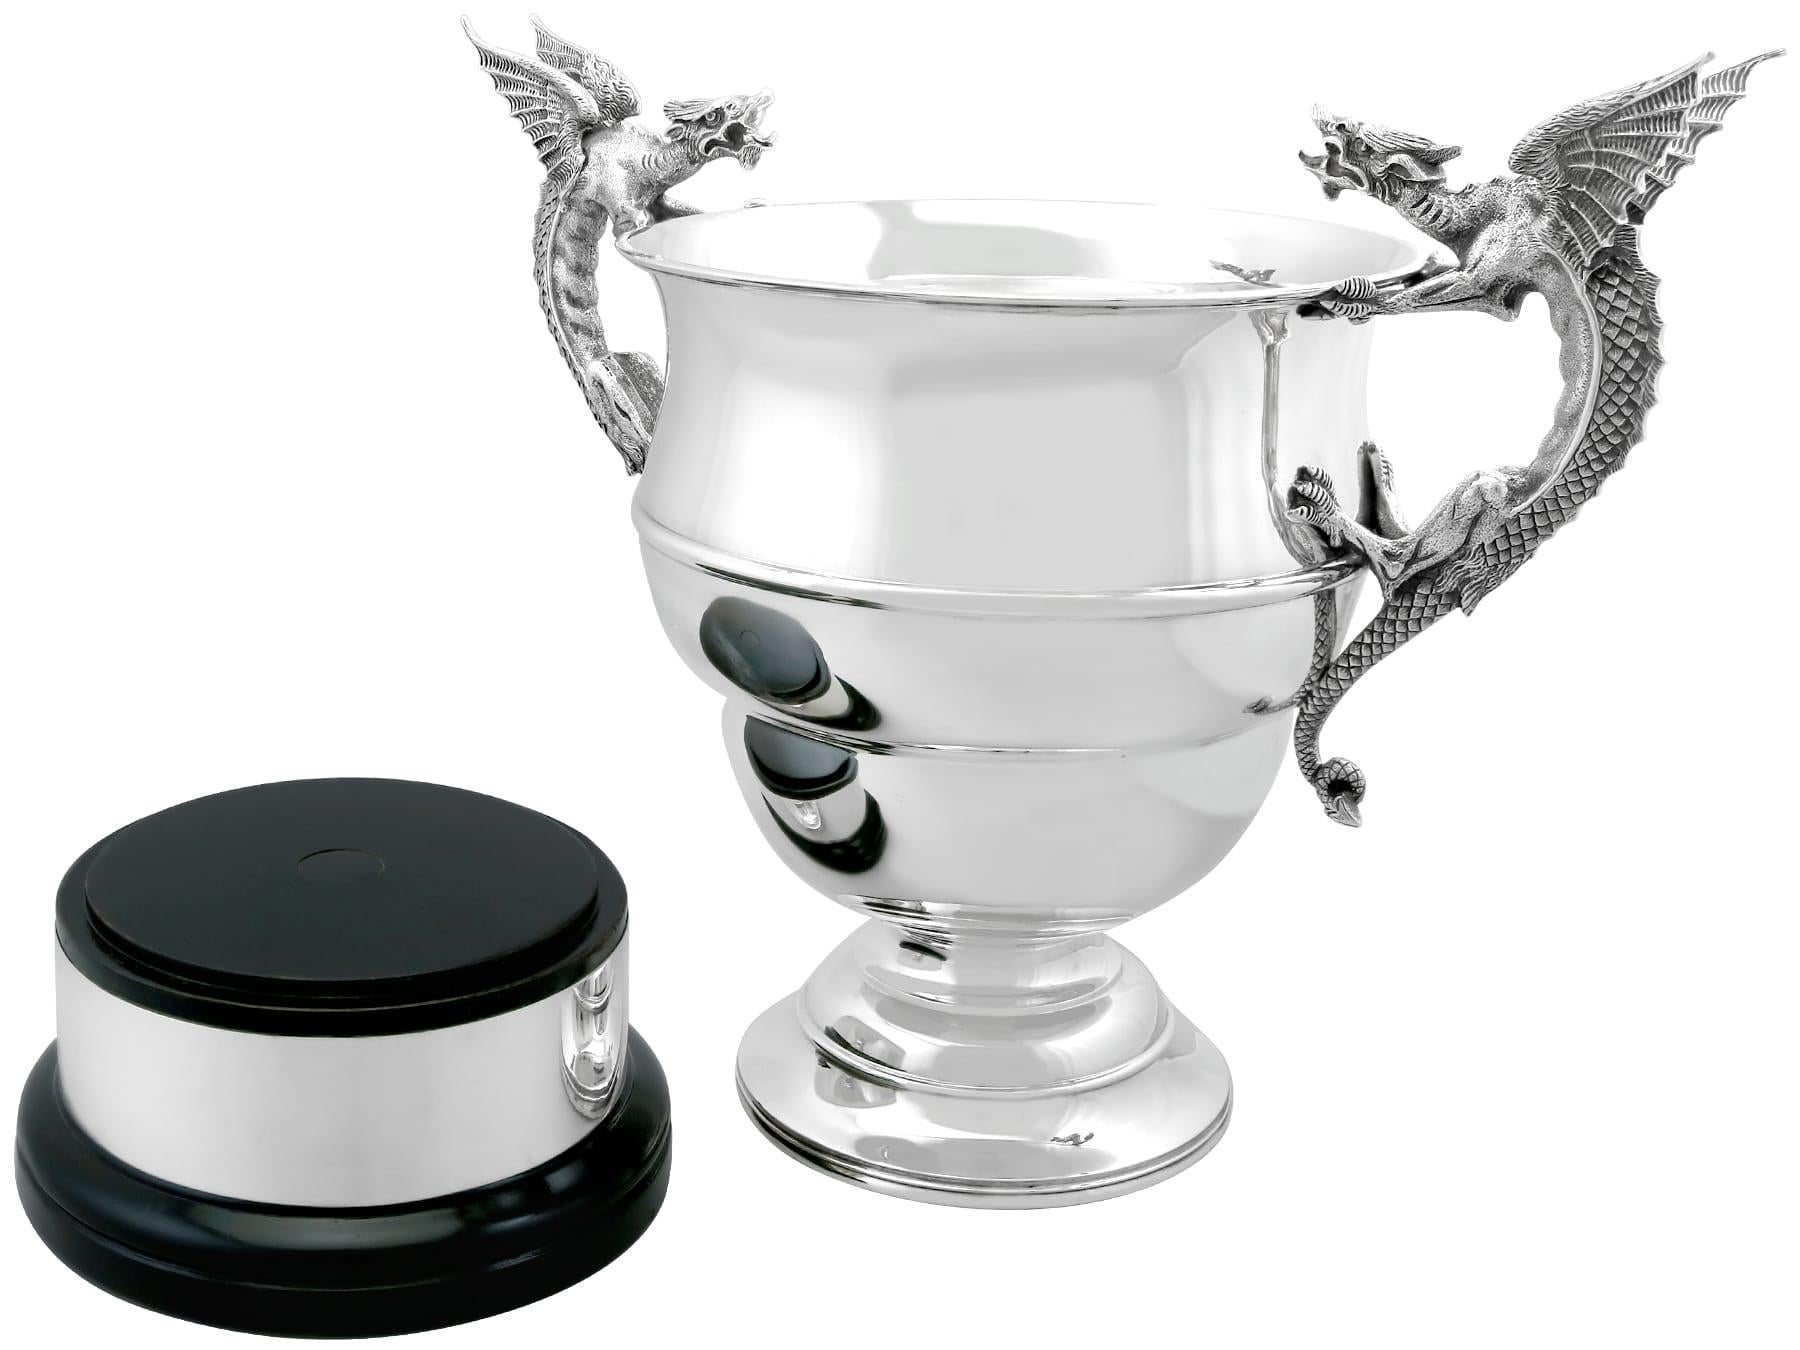 Early 20th Century Antique Edwardian Sterling Silver Presentation Cup and Plinth (1906) For Sale